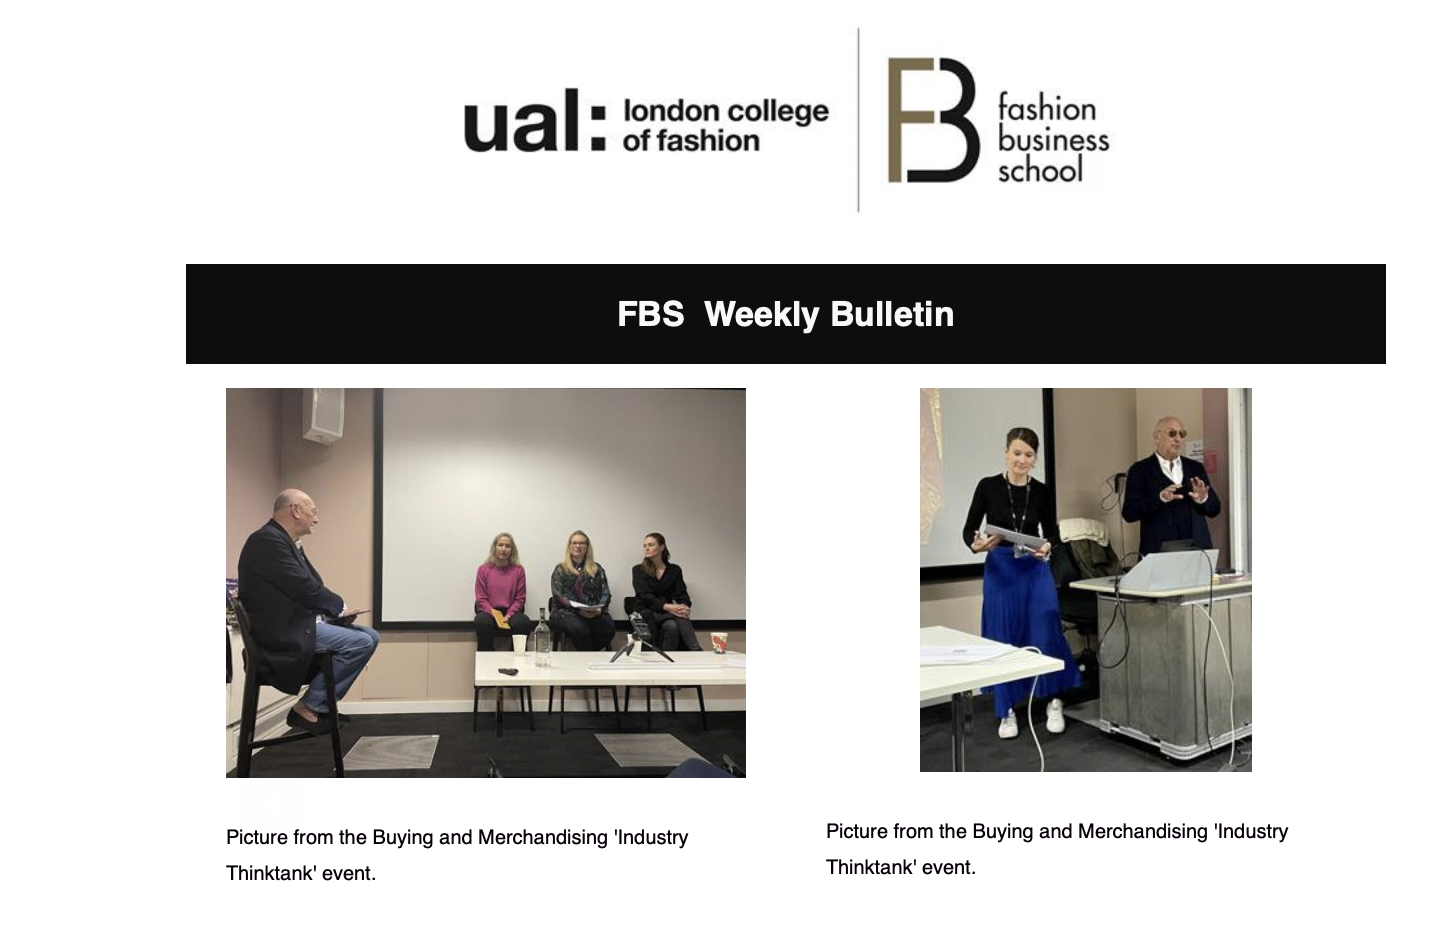 Suzannah Gabriel features in LCF's FBS Weekly Bulletin!